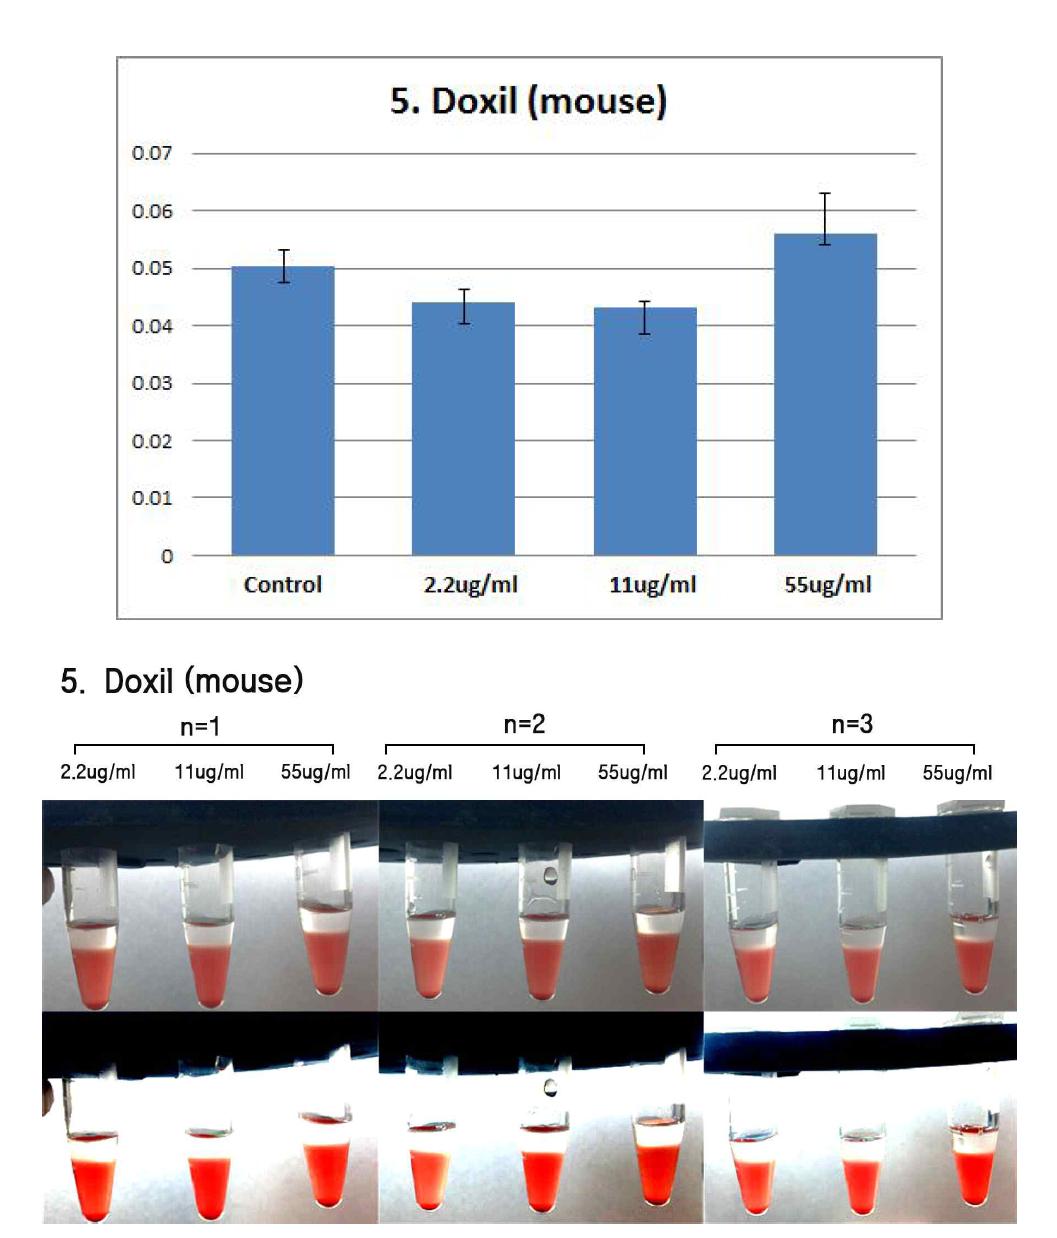 Effects of Doxil on mouse erythrocyte. Erythrocyte were treated with Doxil (55 ug/ml, 11 ug/ml, 2.2 ug/ml) for 2h. The results are presented as mean ± SE